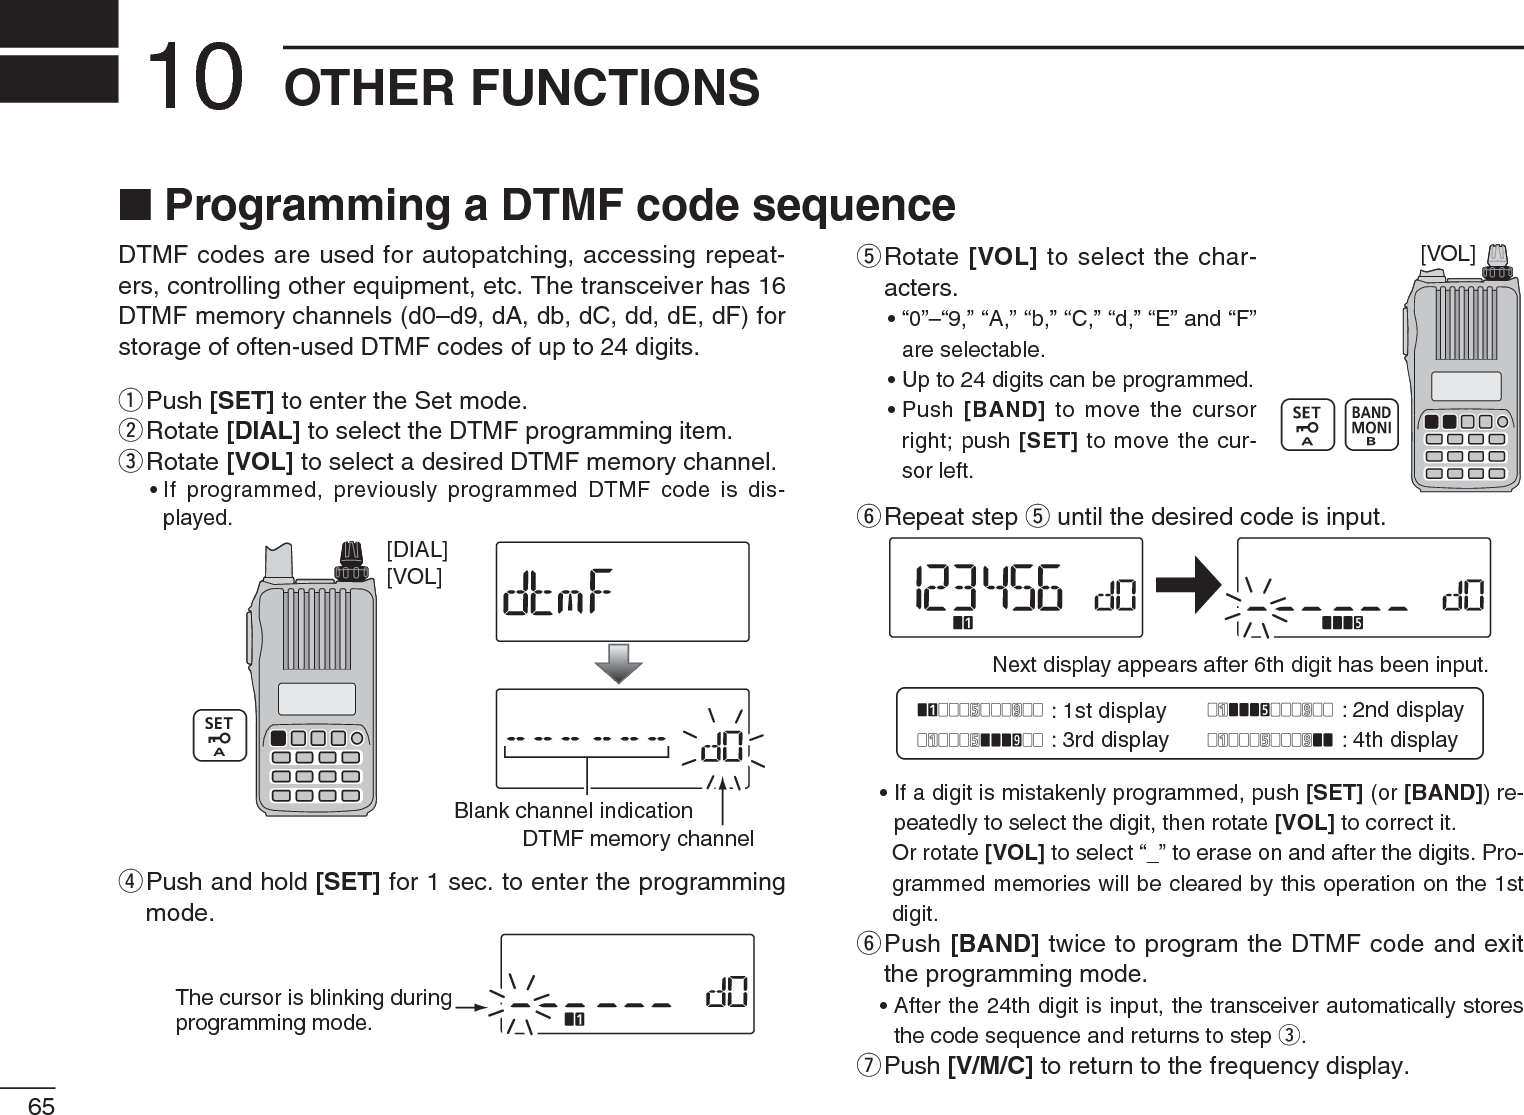 65OTHER FUNCTIONS10DTMF codes are used for autopatching, accessing repeat-ers, controlling other equipment, etc. The transceiver has 16DTMF memory channels (d0–d9, dA, db, dC, dd, dE, dF) for storage of often-used DTMF codes of up to 24 digits.q  Push [SET] to enter the Set mode.w  Rotate [DIAL] to select the DTMF programming item.e  Rotate [VOL] to select a desired DTMF memory channel.• If programmed, previously programmed DTMF code is dis-played.[VOL][DIAL]DTMF memory channelBlank channel indicationr  Push and hold [SET] for 1 sec. to enter the programming mode.The cursor is blinking duringprogramming mode.t  Rotate [VOL] to select the char-acters.• “0”–“9,” “A,” “b,” “C,” “d,” “E” and “F” are selectable.• Up to 24 digits can be programmed.• Push  [BAND] to move the cursor right; push [SET] to move the cur-sor left.y  Repeat step t until the desired code is input.Next display appears after 6th digit has been input.: 1st display : 2nd display: 3rd display : 4th display• If a digit is mistakenly programmed, push [SET] (or [BAND]) re-peatedly to select the digit, then rotate [VOL] to correct it.Or rotate [VOL] to select “_” to erase on and after the digits. Pro-grammed memories will be cleared by this operation on the 1st digit.y  Push [BAND] twice to program the DTMF code and exit the programming mode.• After the 24th digit is input, the transceiver automatically stores the code sequence and returns to step e.uPush [V/M/C] to return to the frequency display.N Programming a DTMF code sequence[VOL]